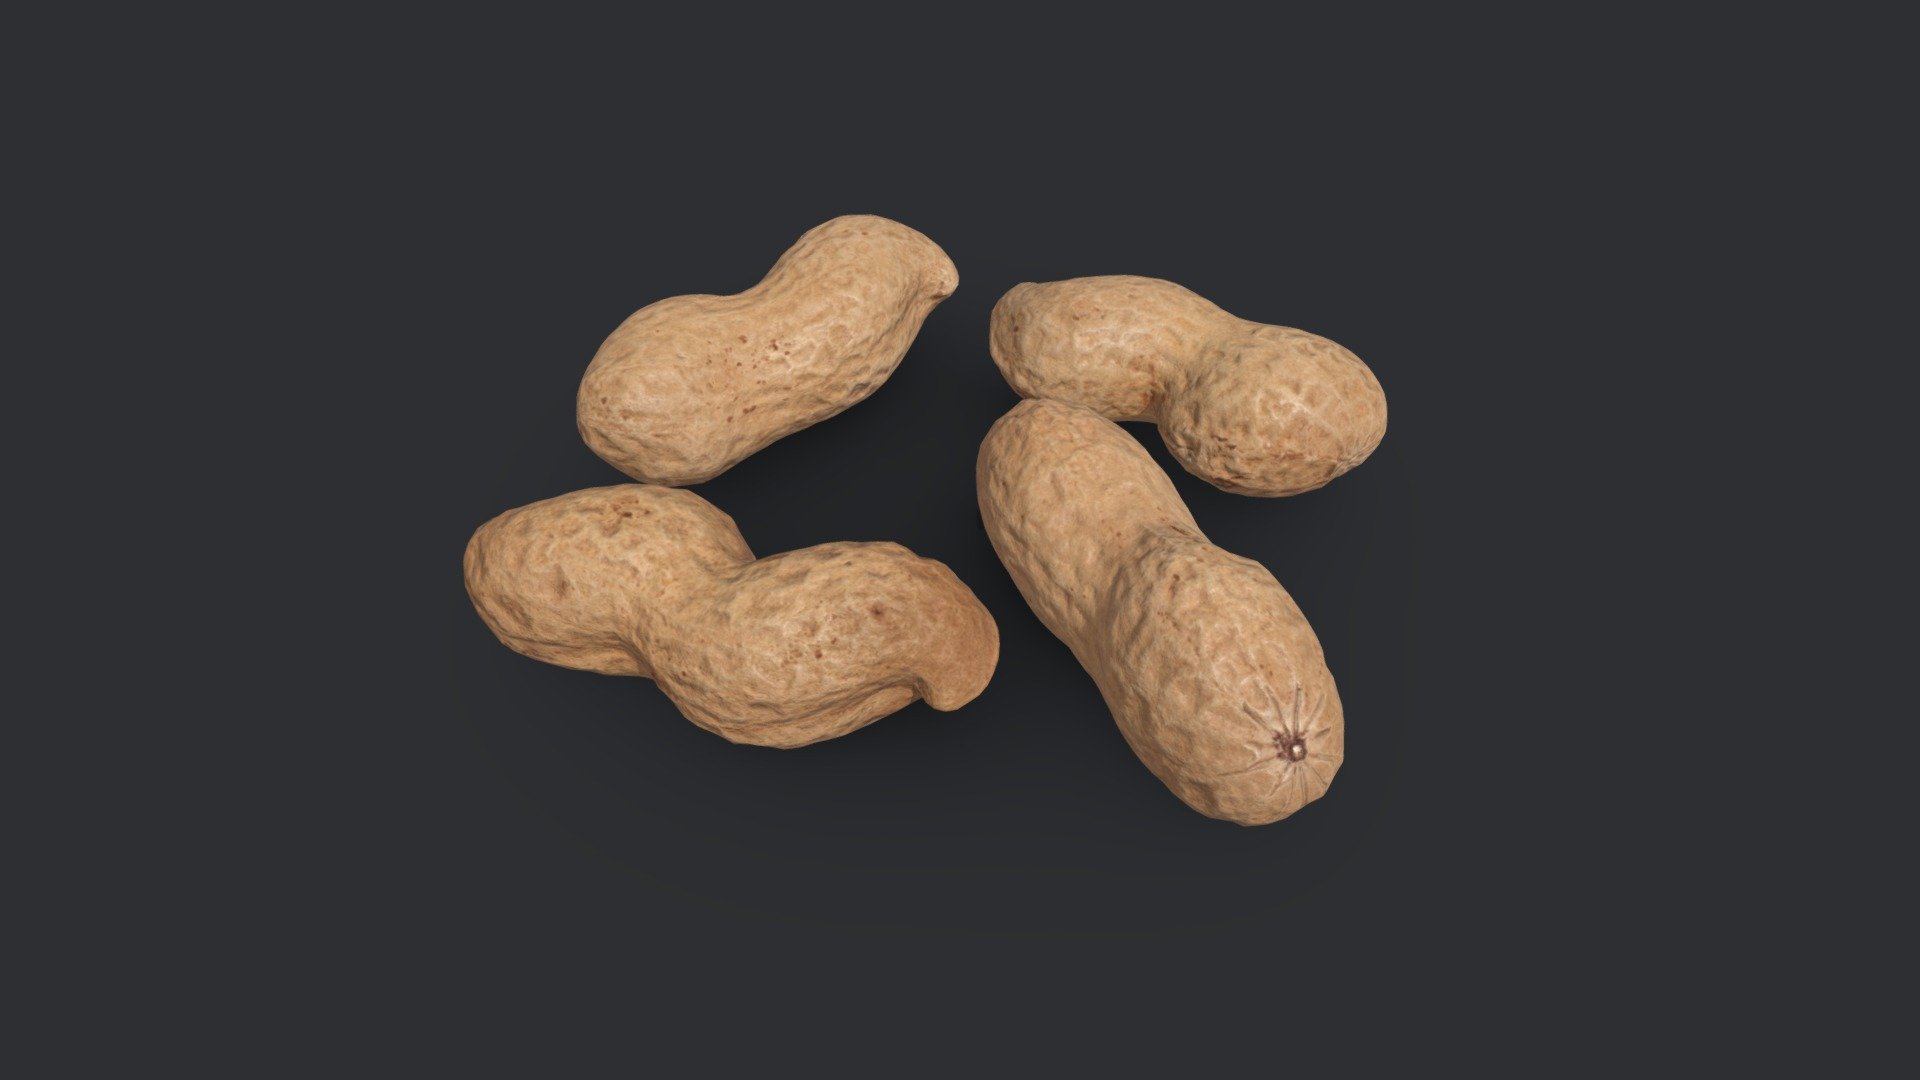 Photogrammetry models of four individual unshelled double pod peanuts.

Each model has three base levels of detail. Optimized into uniform triangles with clean UVs.

Peanut 1

Lod 1 - 28,544 tris, 

Lod 2 - 1,784 tris,

Lod 3 - 446 tris.

Peanut 2, 3 &amp; 4

Lod 1 - 31,232 tris,

Lod 2 - 1952 tris,

Lod 3 - 488 tris.

4K PNG textures (Albedo, Normal, Ambient Occulsion, Roughness and Gloss). All levels of detail share the same textures except for the Normal map, where each LOD has a unique Normal.

Lod 2 used for 3D preview with 1K JPG textures.

Real world scale 3d model